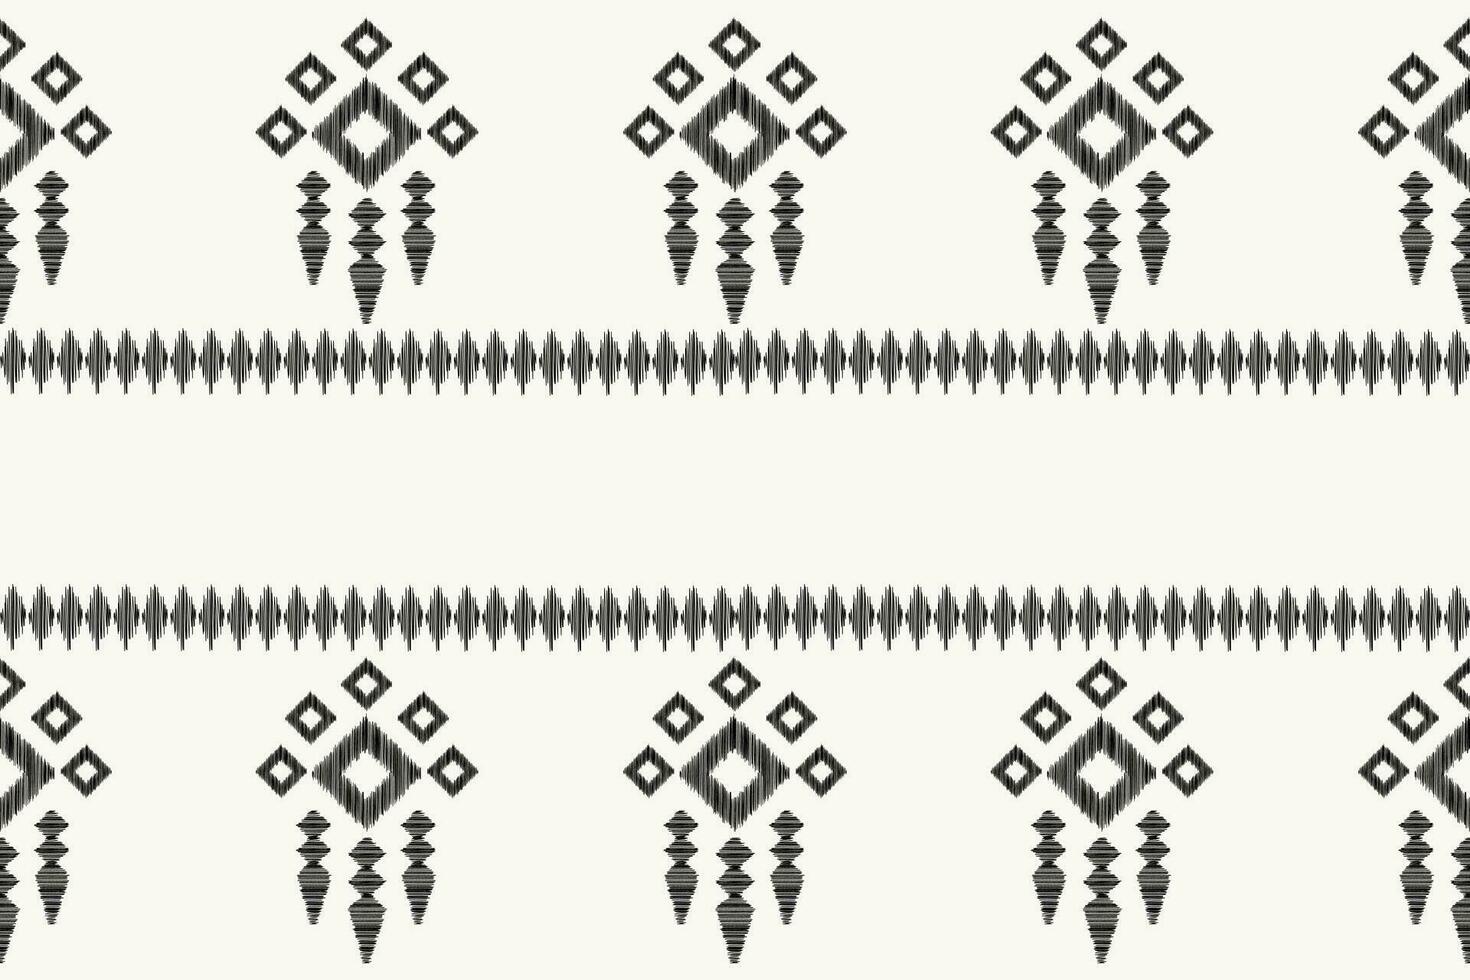 Ethnic Ikat fabric pattern geometric style.African Ikat embroidery Ethnic oriental pattern black white background. Abstract,vector,illustration.Texture,clothing,frame,decoration,carpet,motif. vector